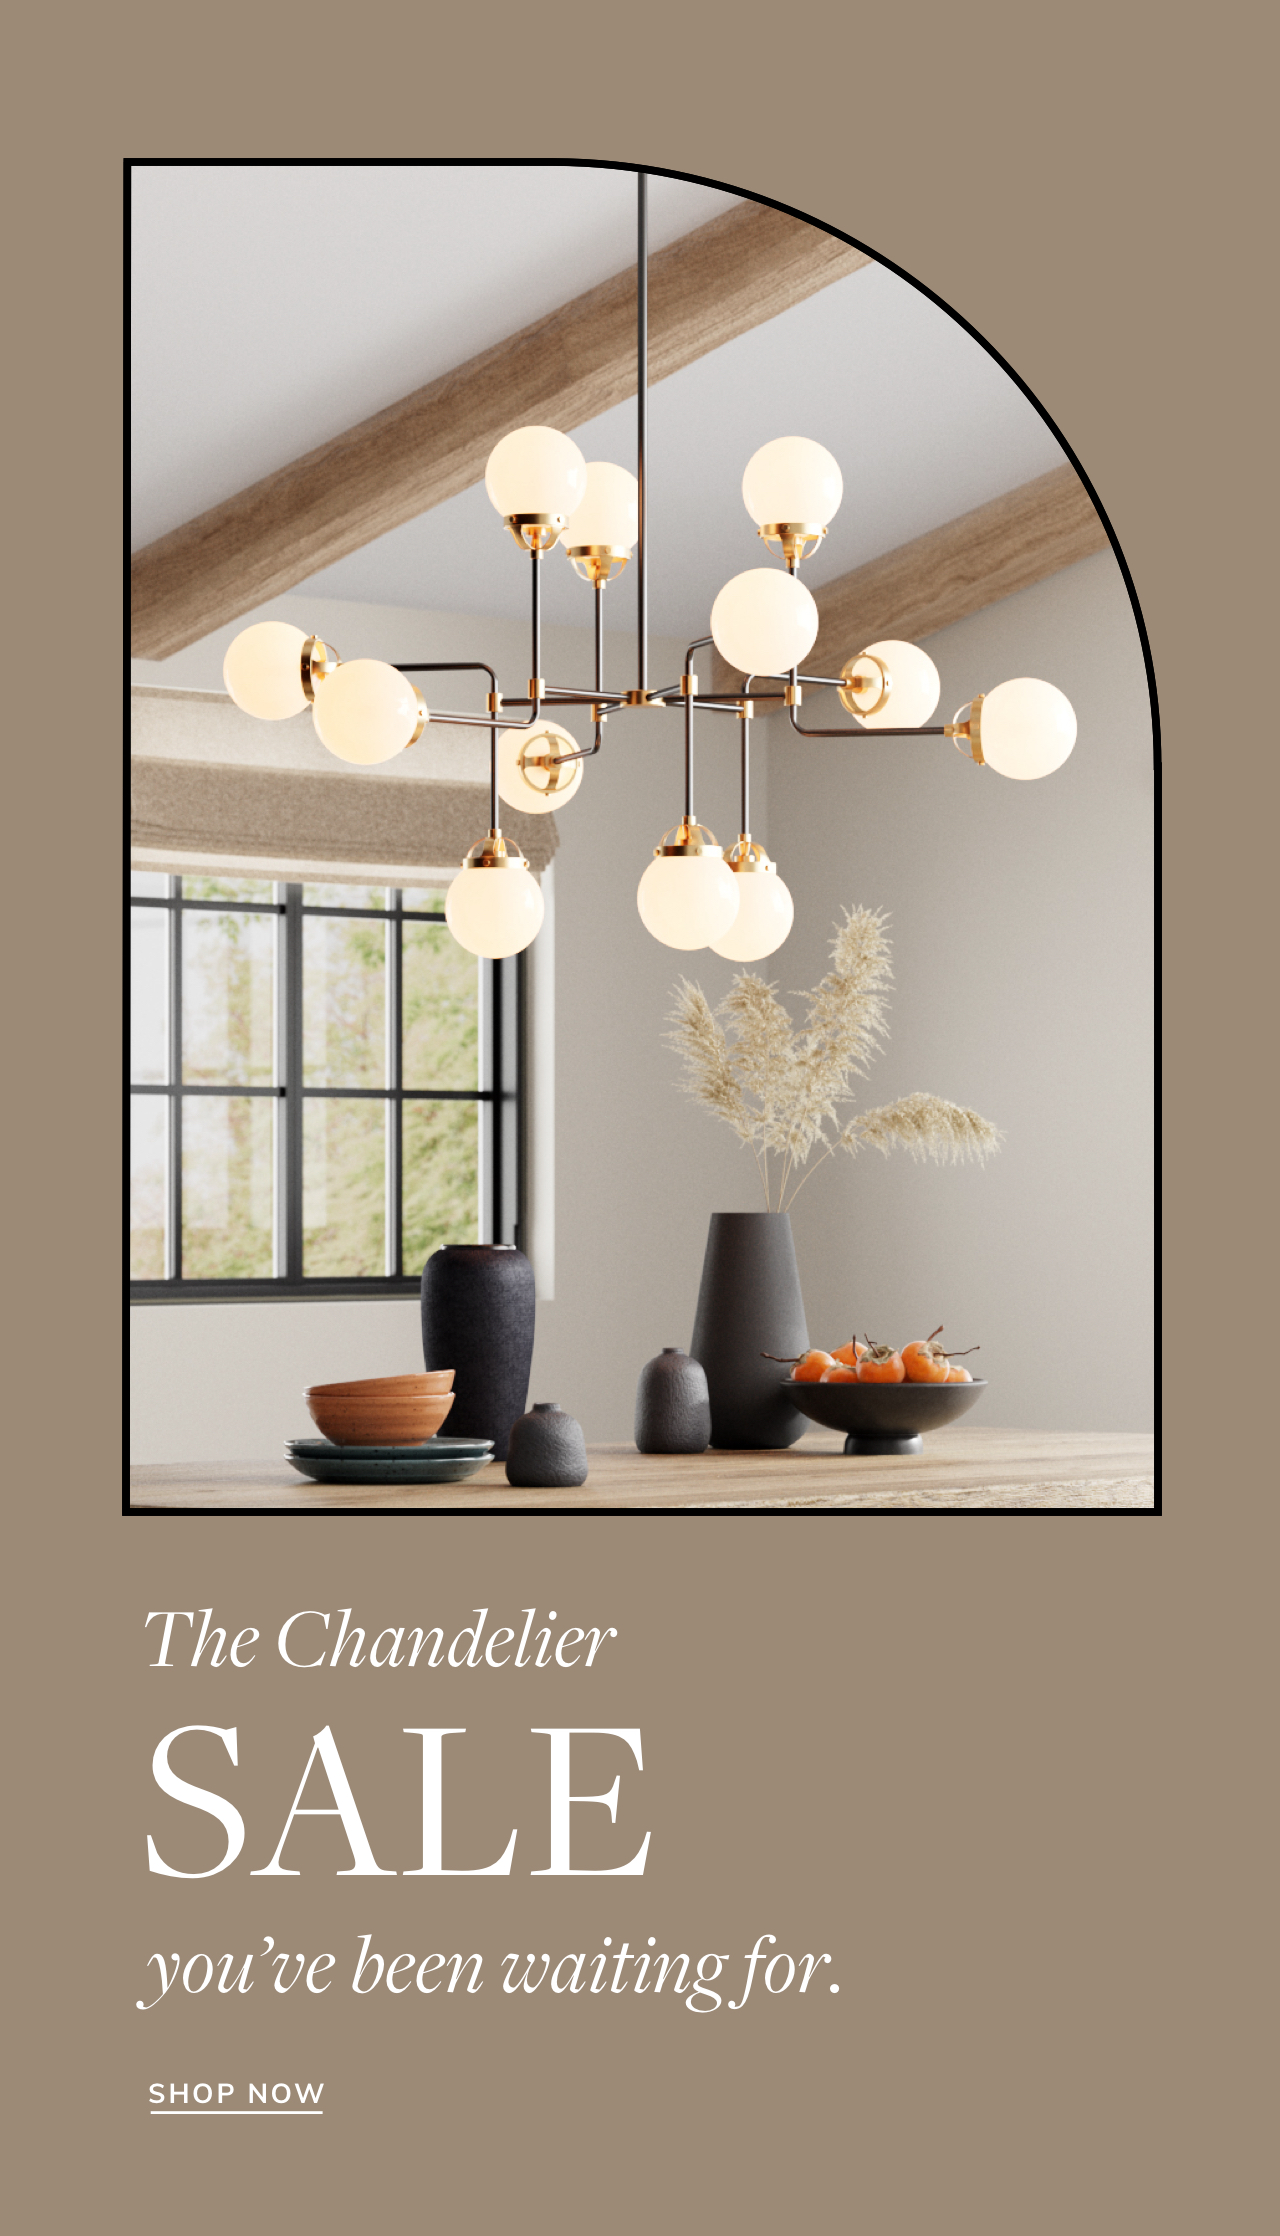 The Chandelier Sale